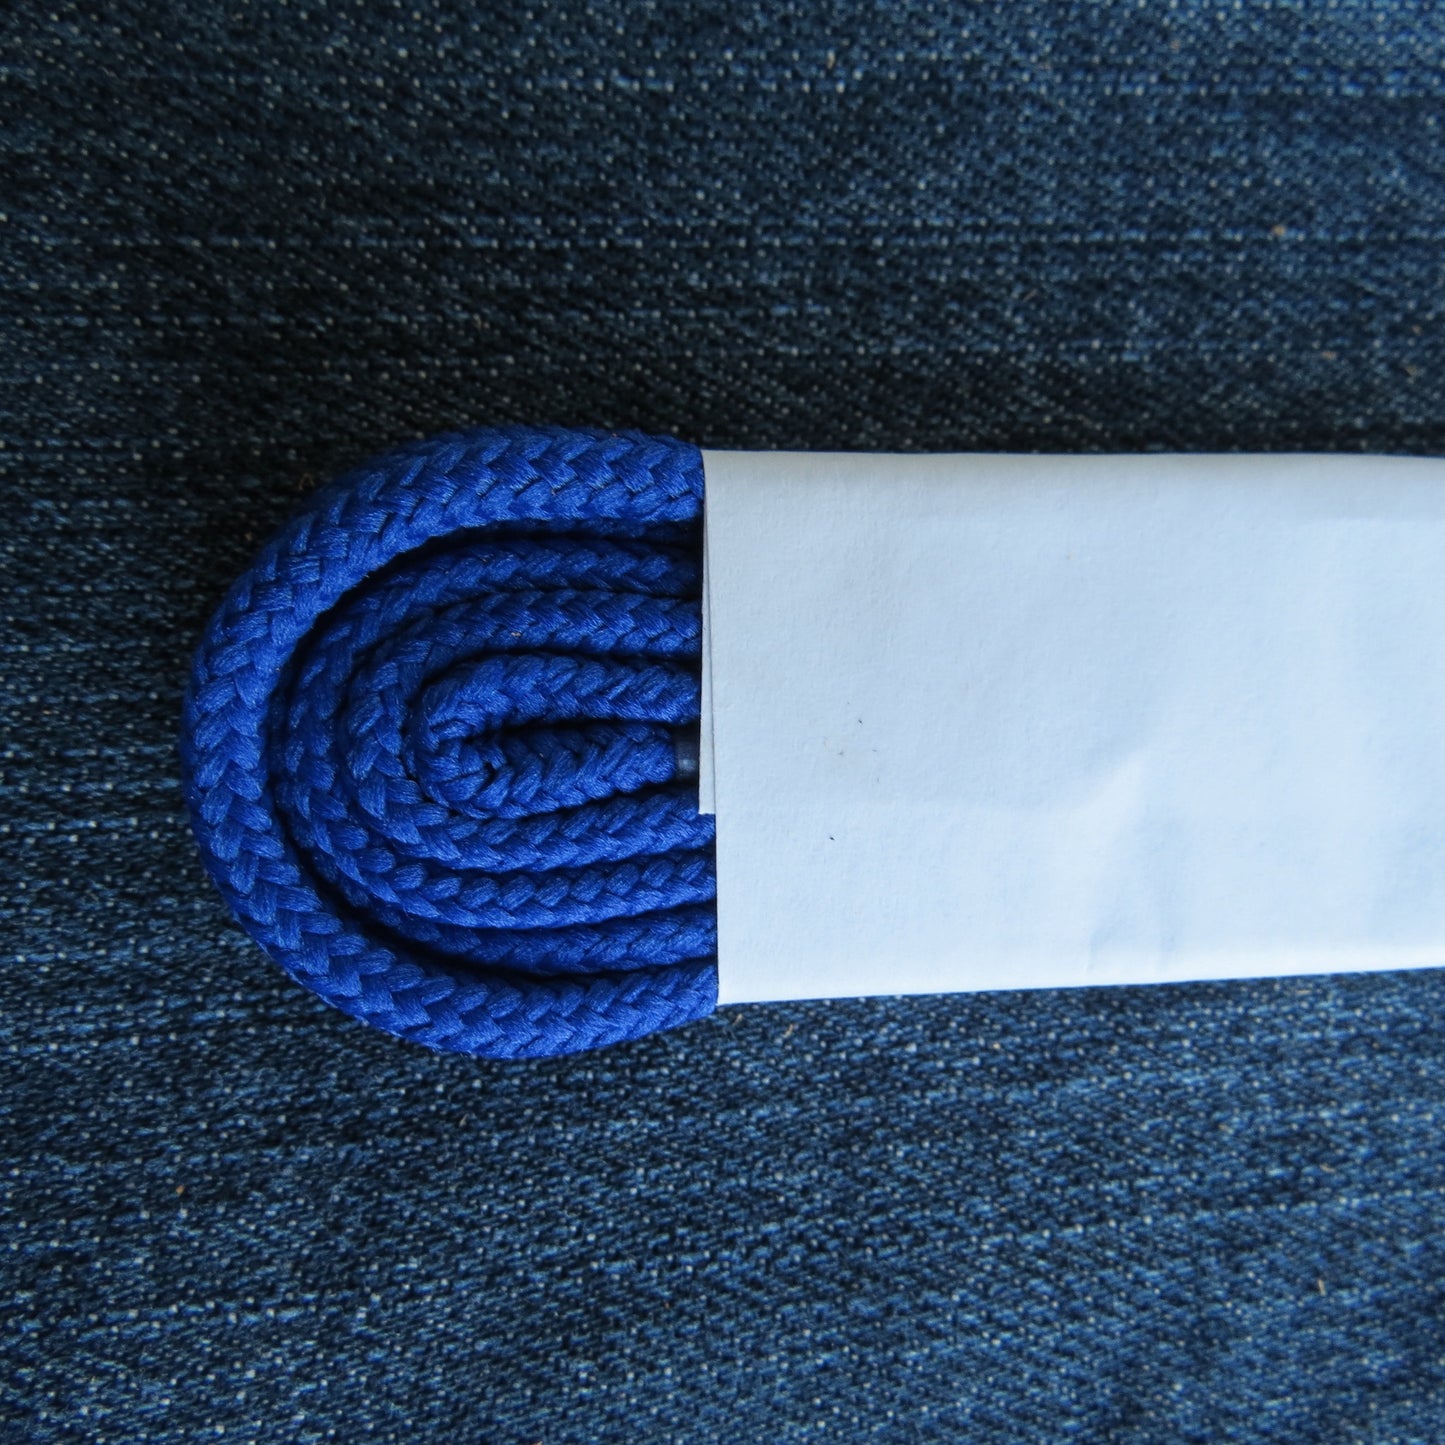 FreeLander Polyester Laces for Grips